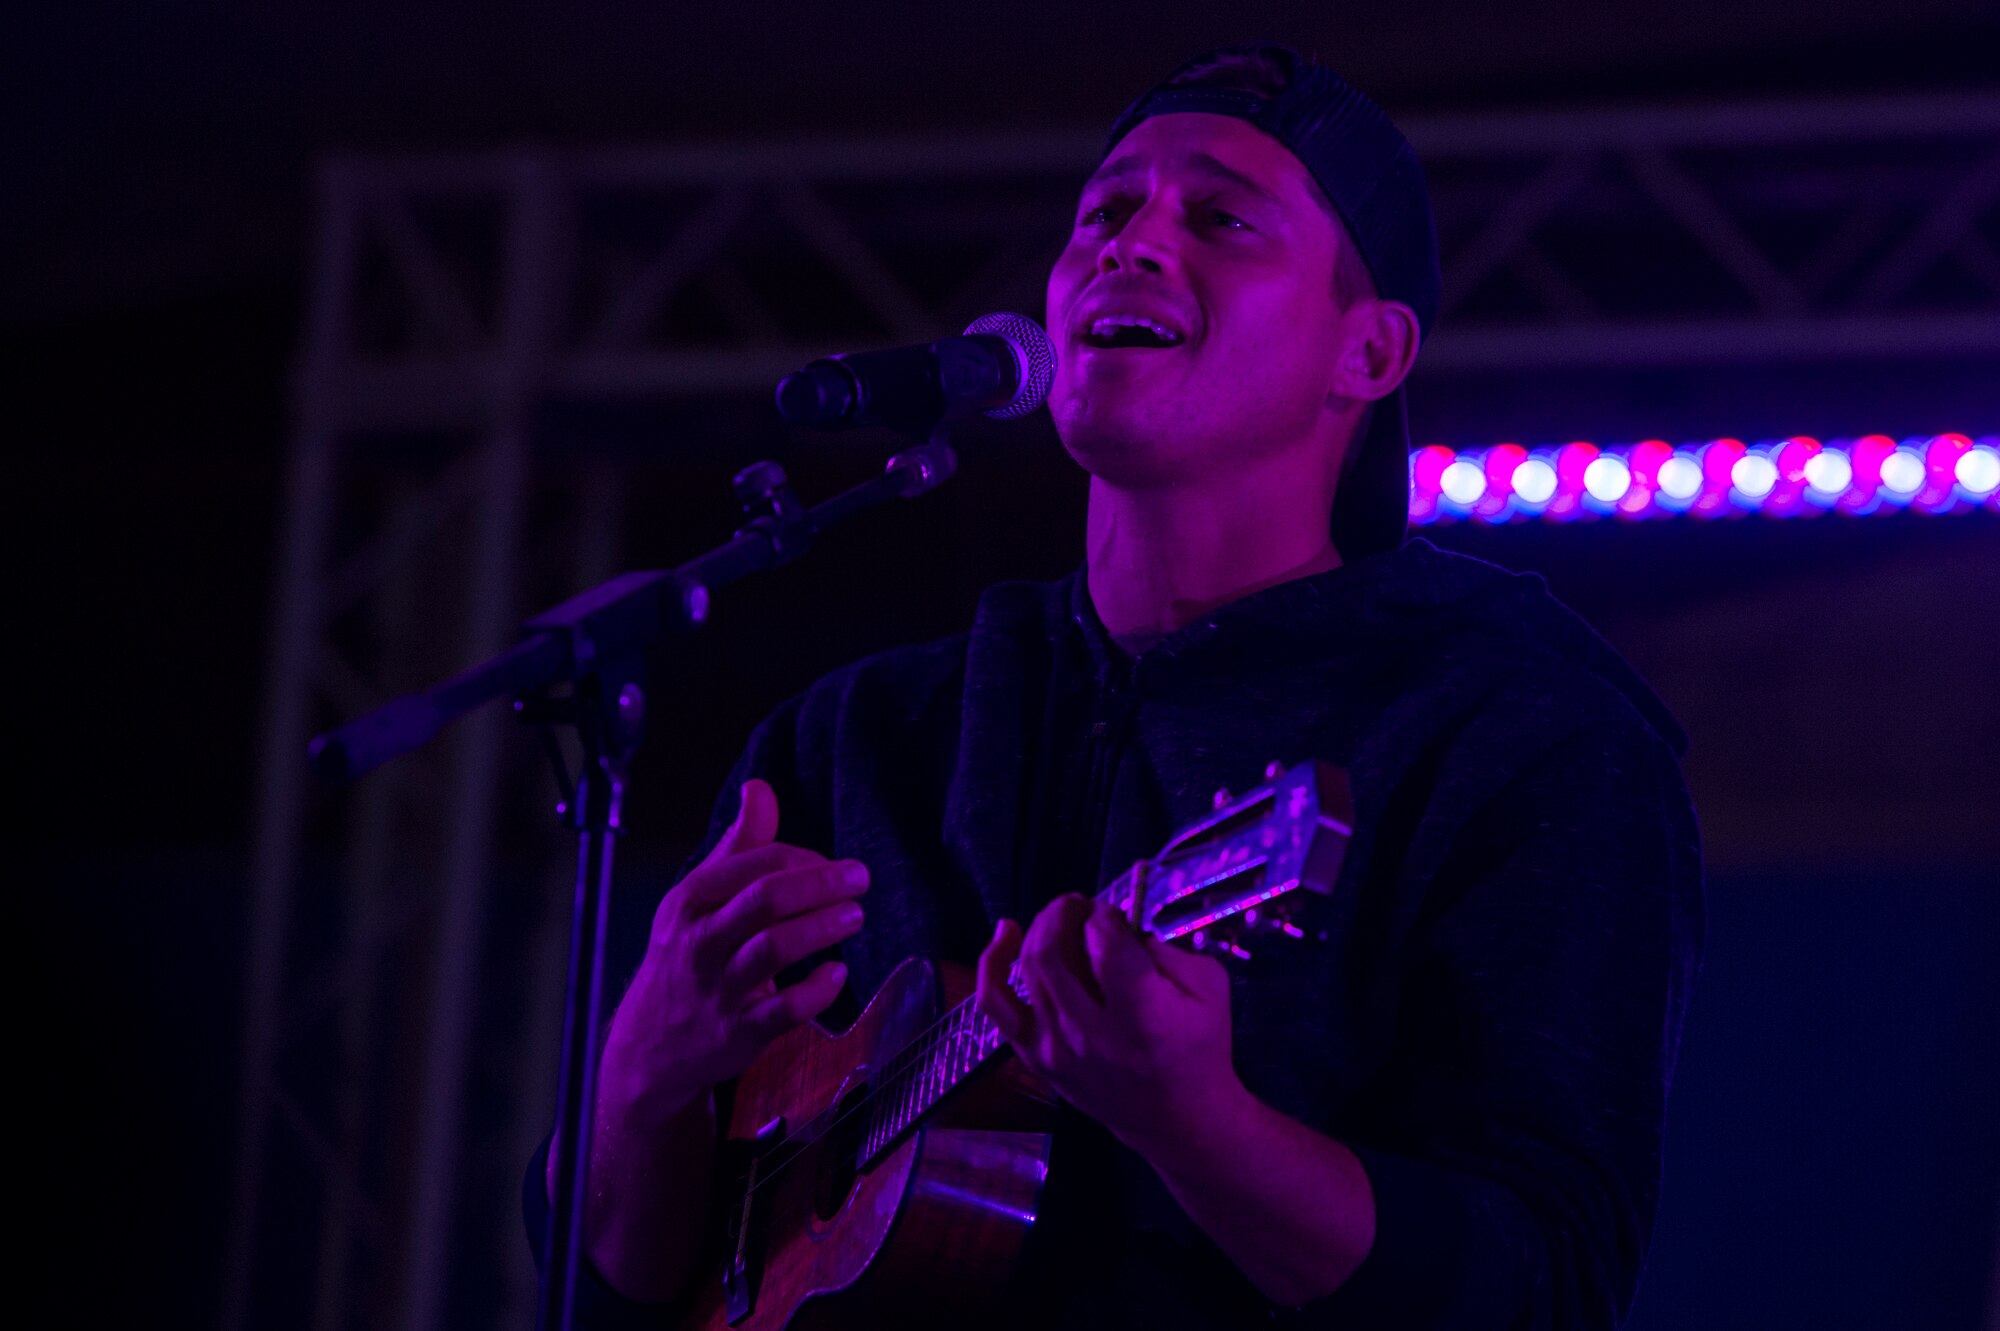 Makua Rothman, professional surfer, sings for service members during the United Service Organizations (USO) tour April 1, 2019, at Al Udeid Air Base, Qatar. U.S. Air Force Gen. Paul Selva, the Vice Chairman of the Joint Chiefs of Staff, hosted the tour alongside celebrities and performers including Robert Irvine, Craig Morgan, and professional athletes.